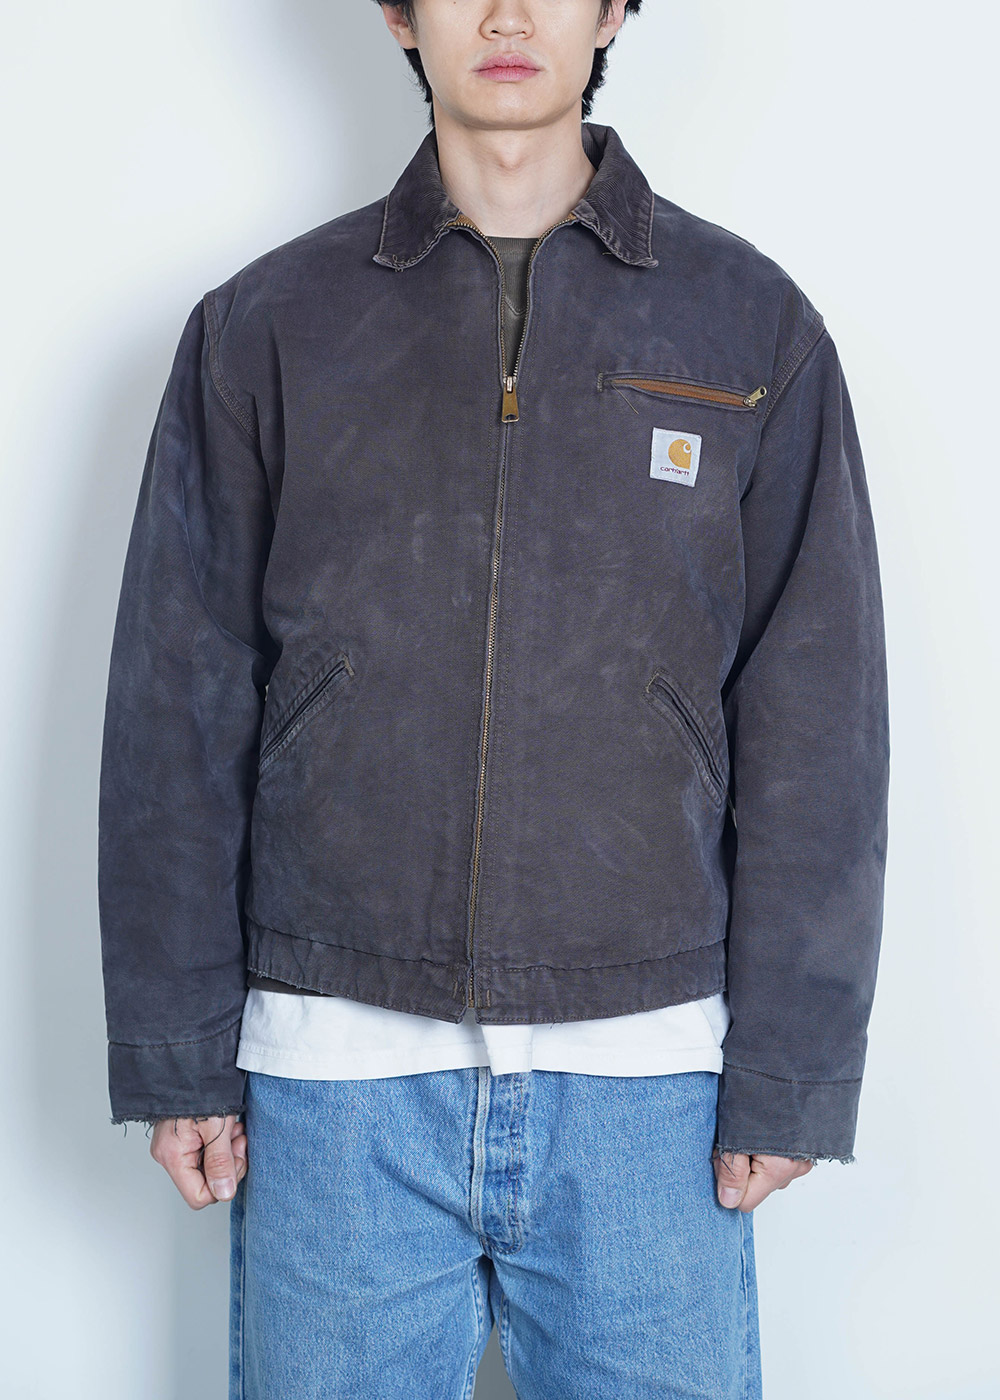 reproduction 044 / carhartt (Overdyed)